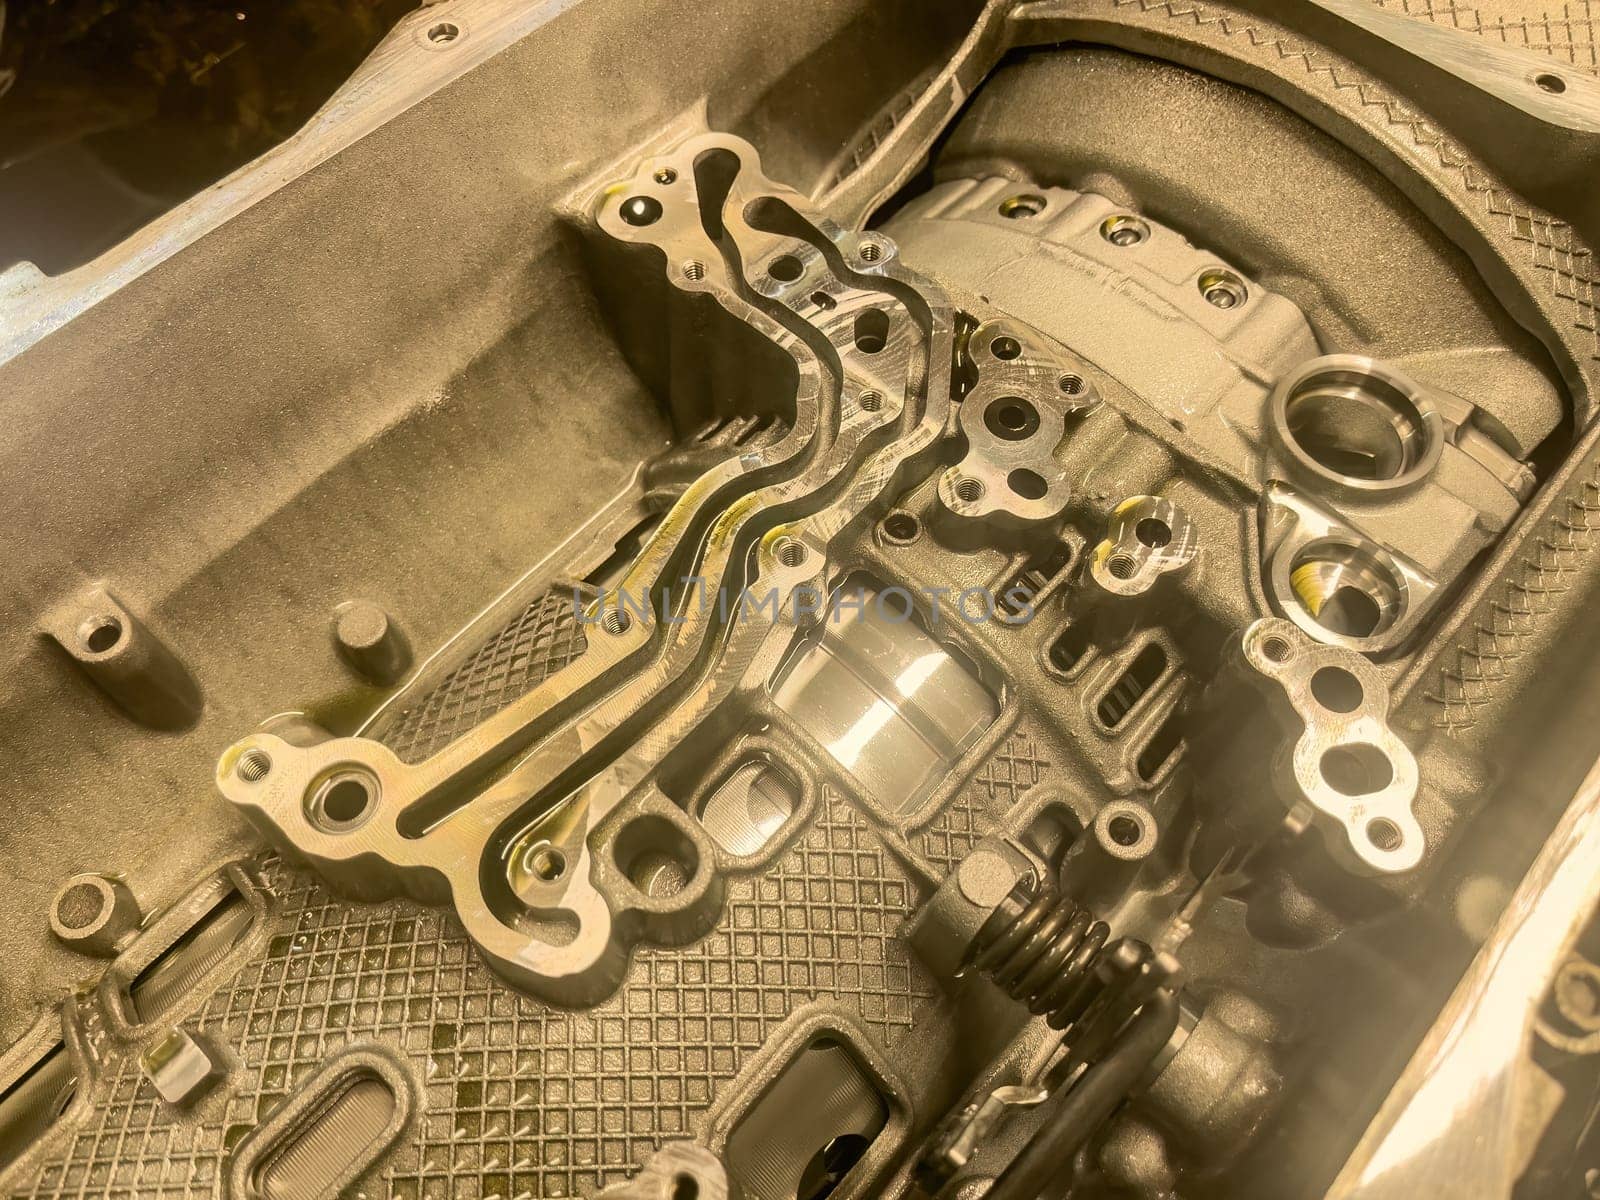 Close-up of mechanical repairs on an automatic gearbox during servicing or refurbishment.